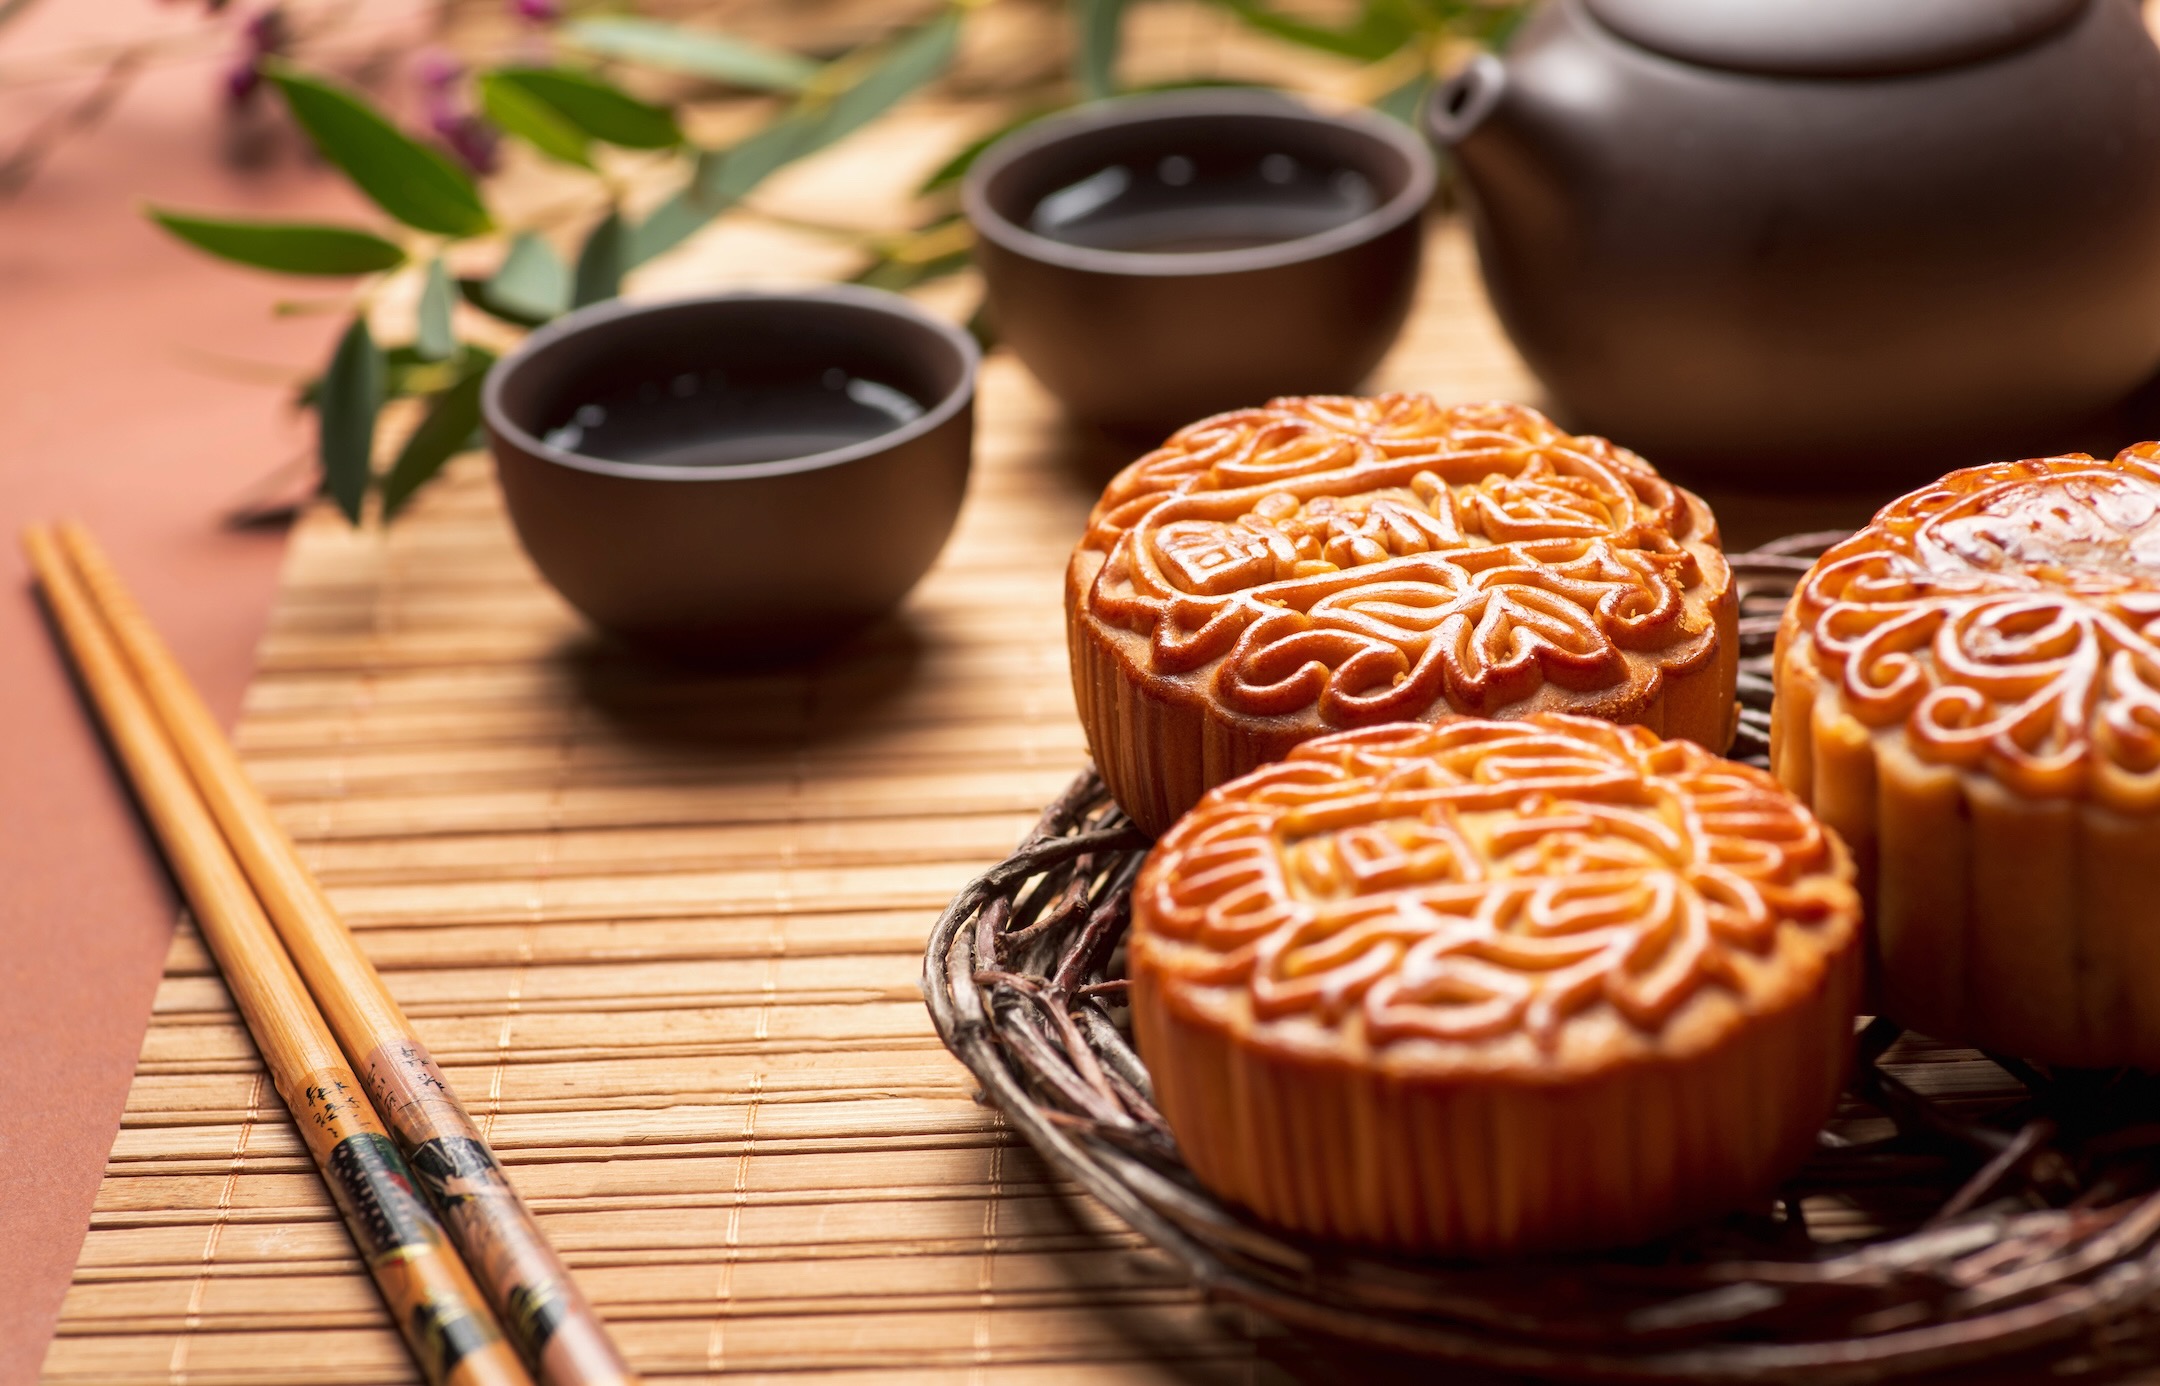 Mooncake traditional Chinese pastry served for Mid Autumn day festival with herbal tea and with various staffing. Tradition and holiday in China and parts of East Asia